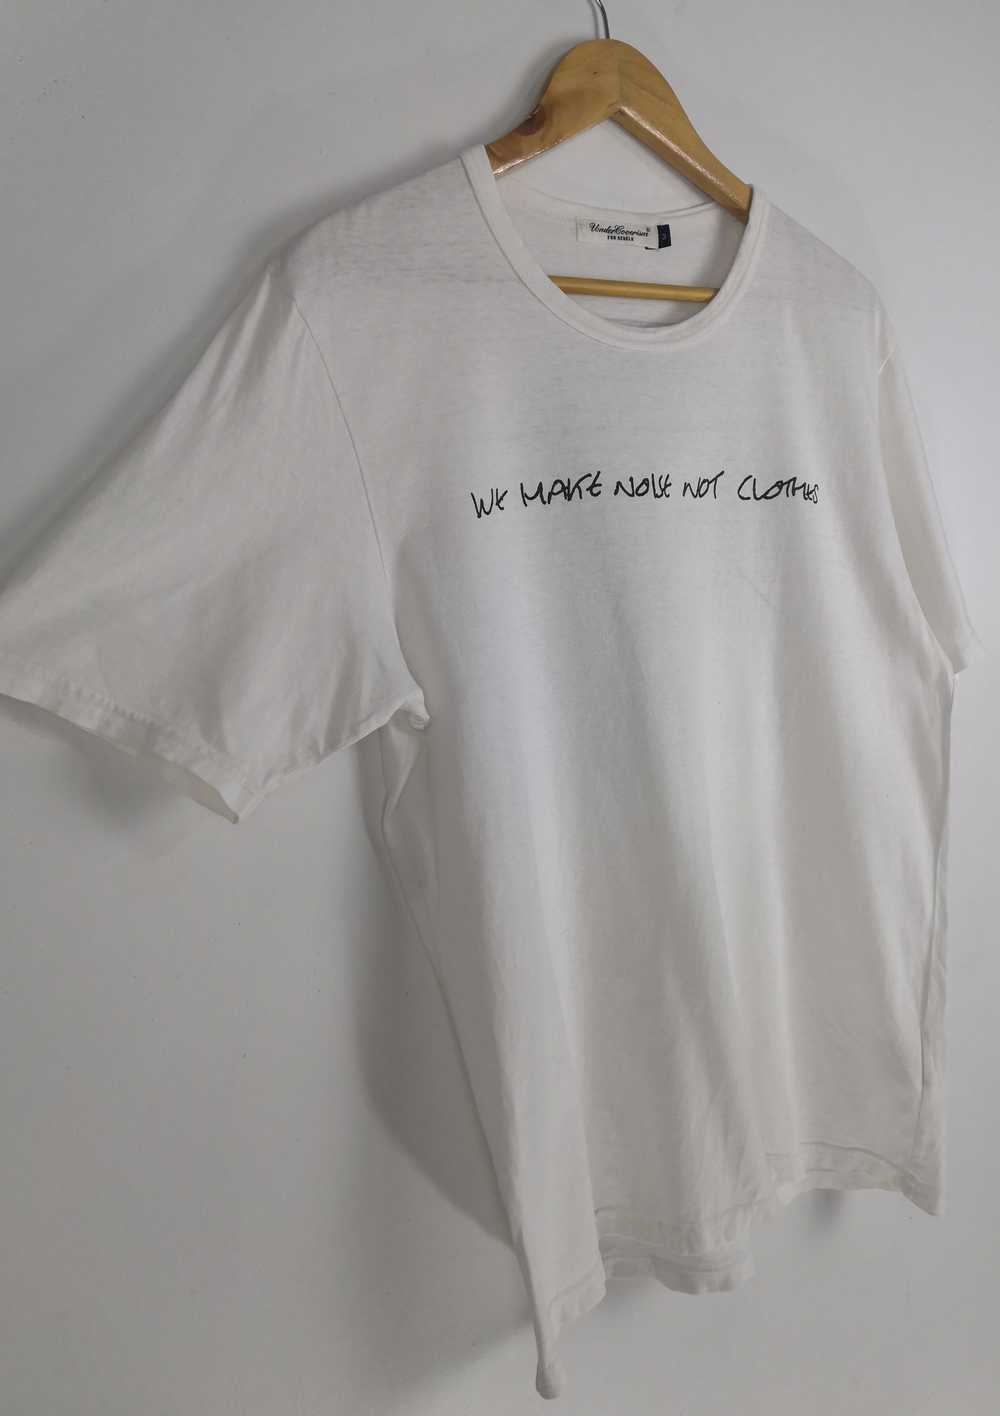 Undercover Graphic T-Shirt We Make Noise Not Clot… - image 3